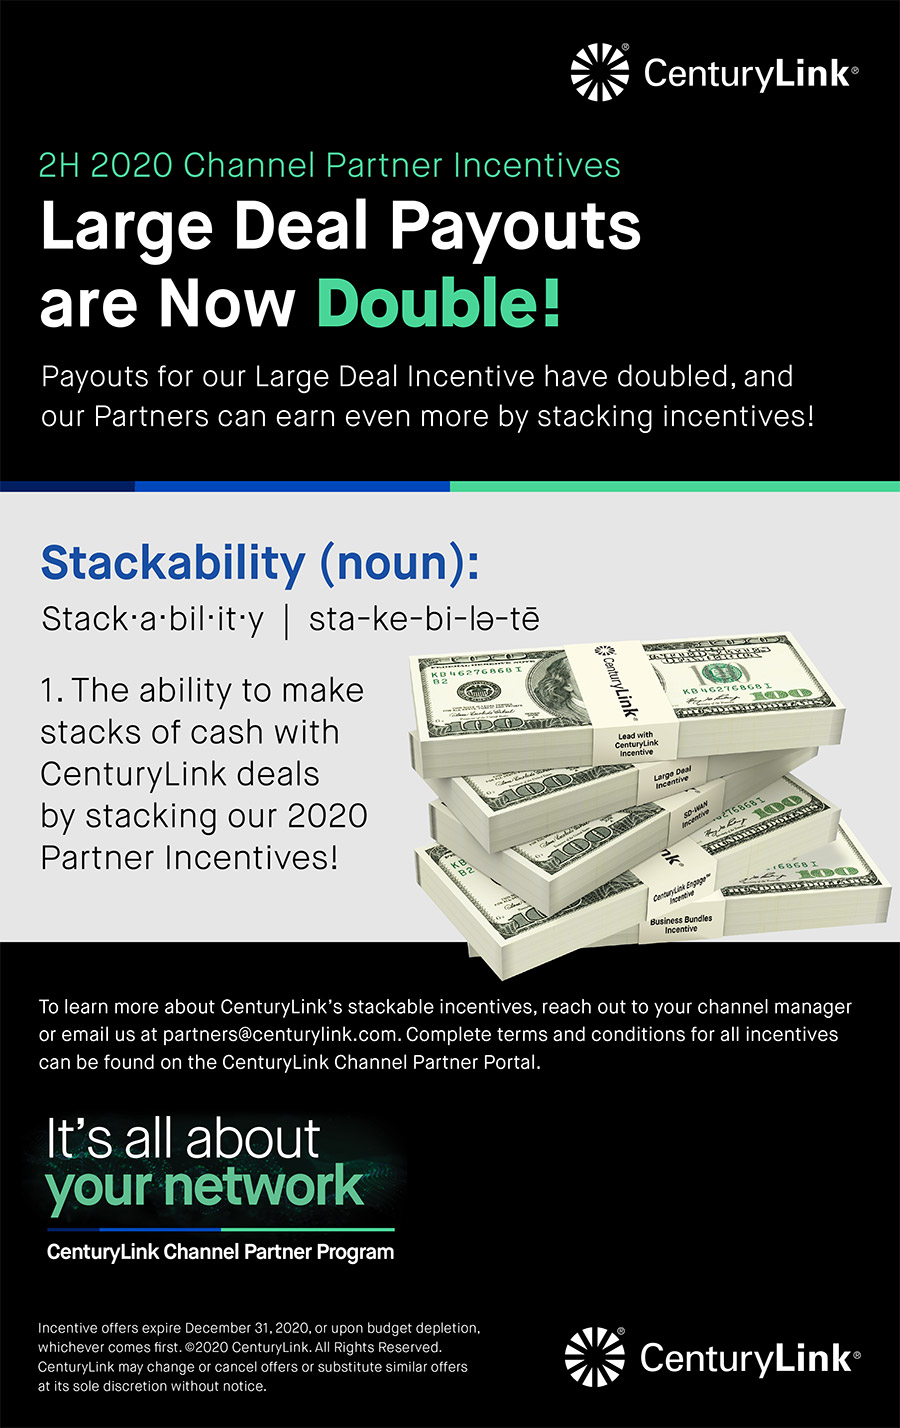 CenturyLink Stackability LARGE DEAL PAYOUTS NOW DOUBLE